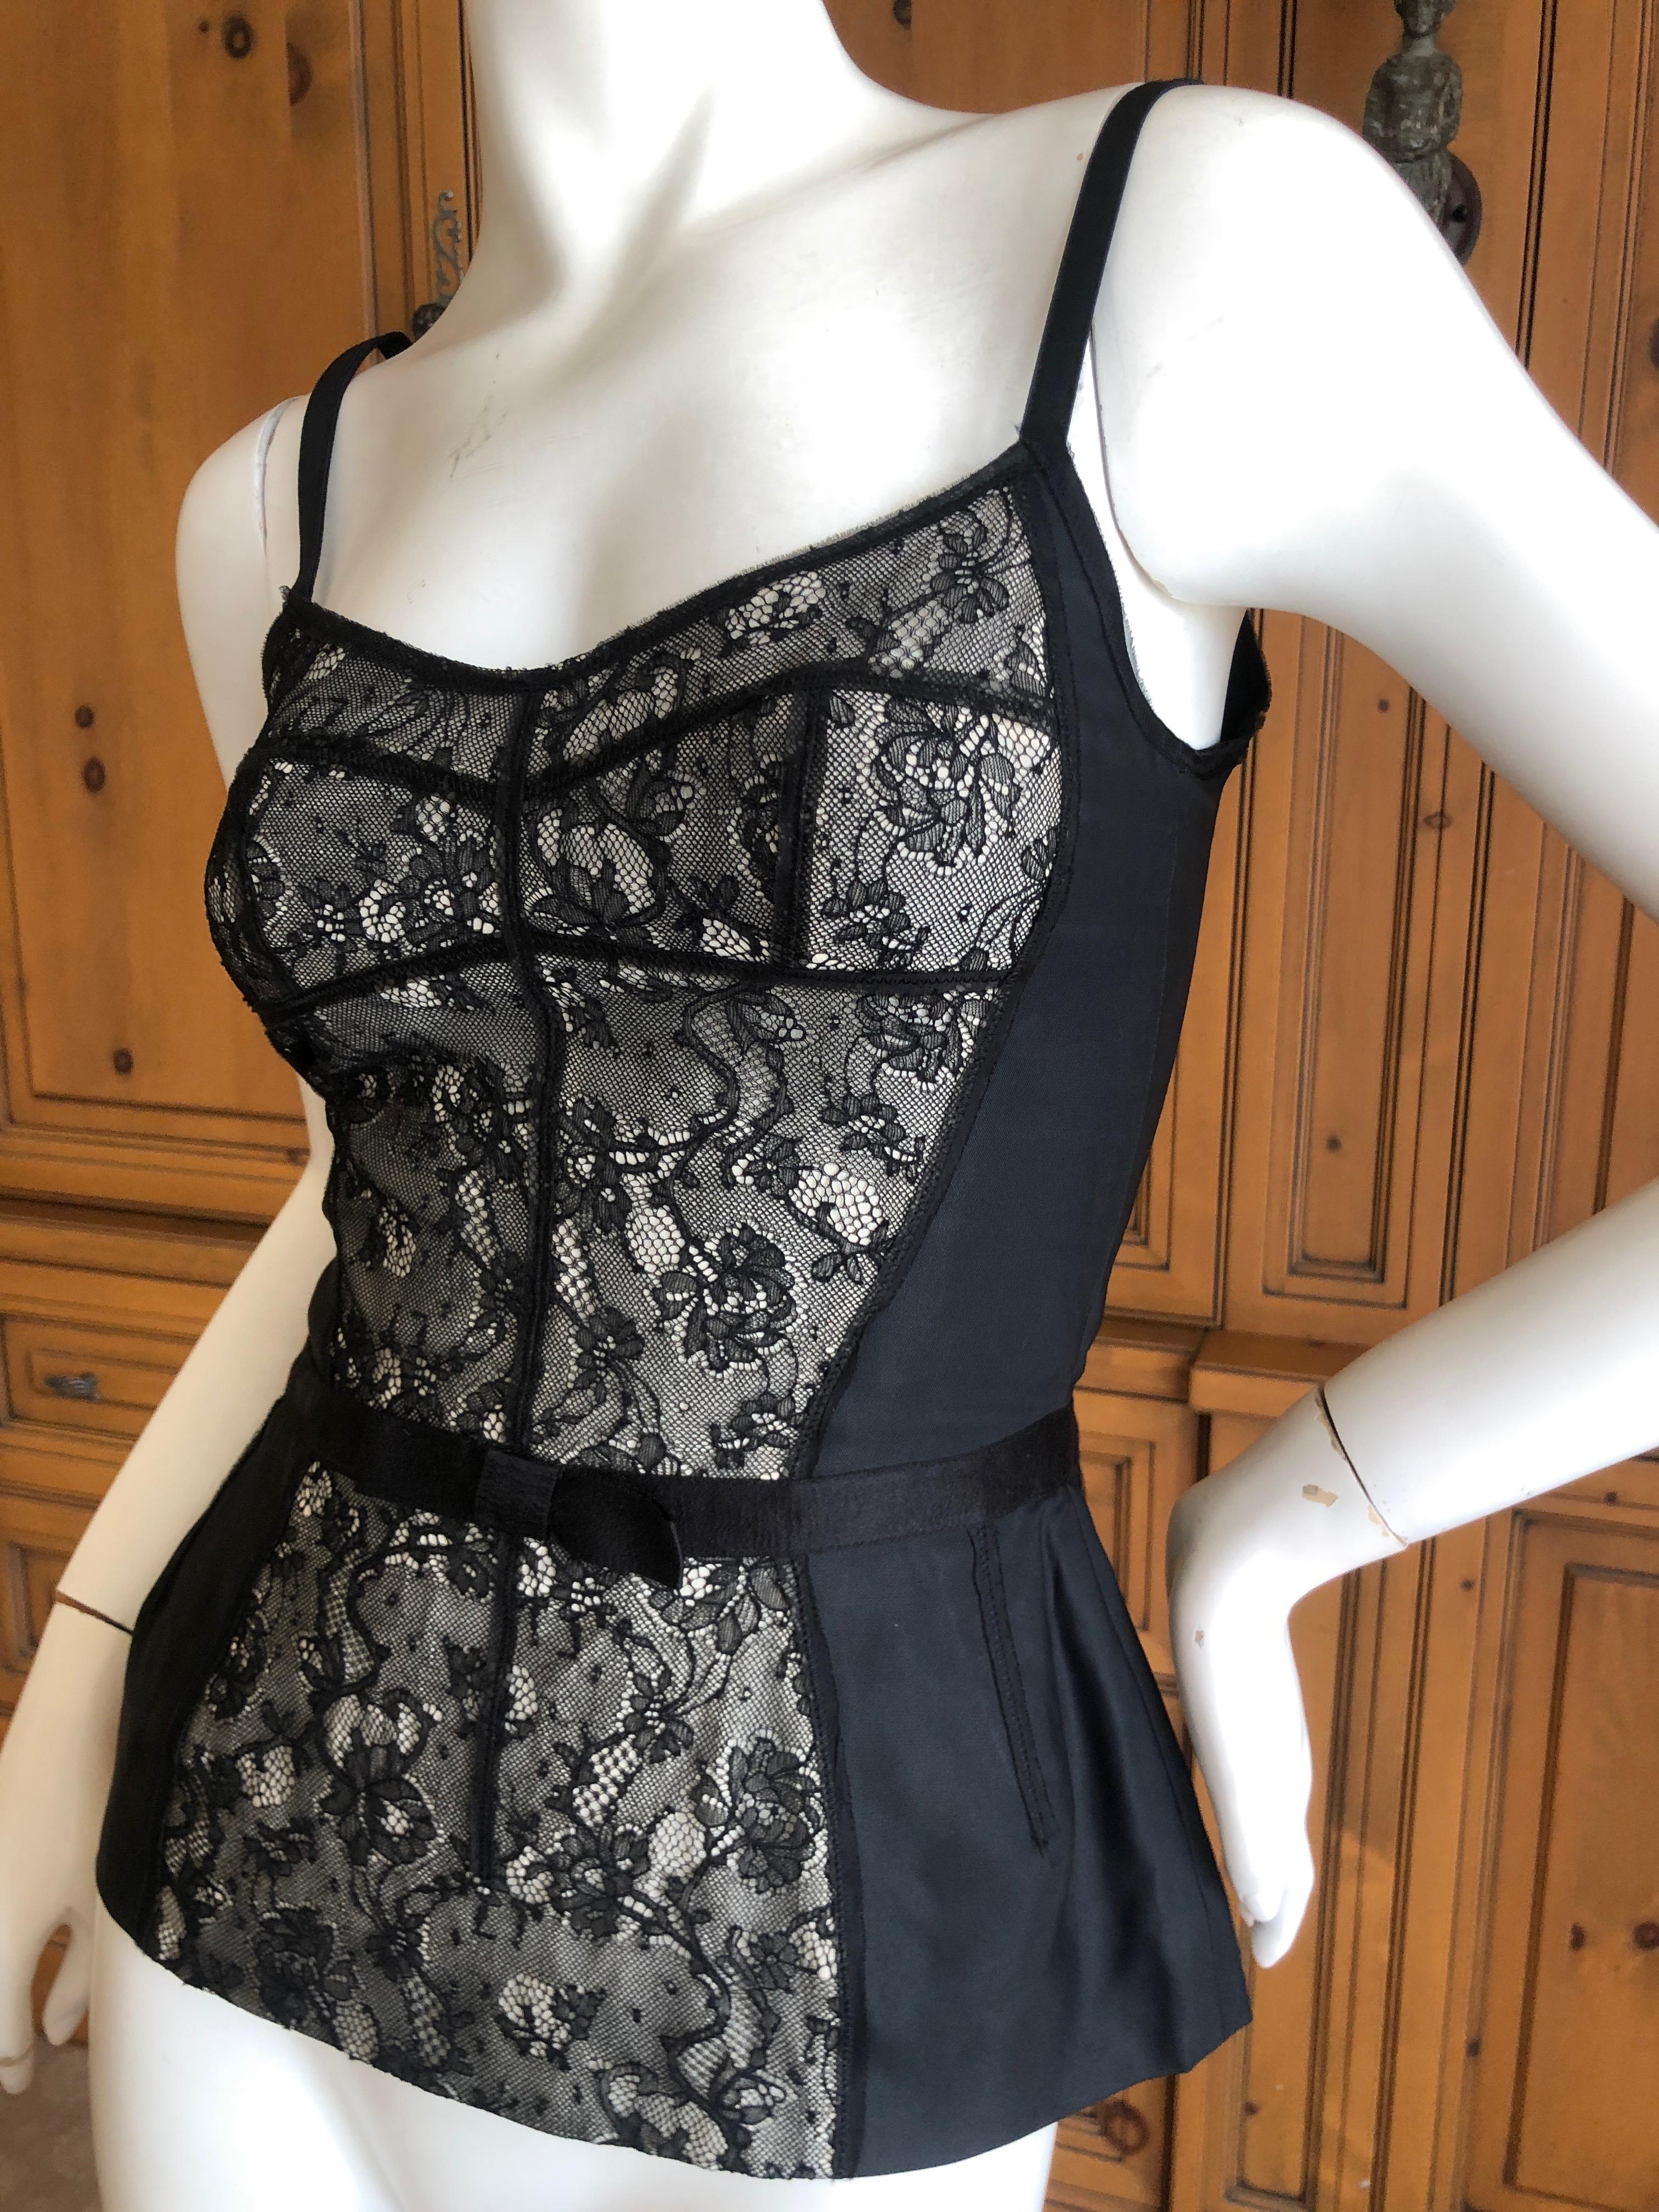 D&G Dolce & Gabbana Vintage Black Lace Corset with Cabachon Buttons.
Marked size 42, lots of stretch
Bust 34'
Waist 26